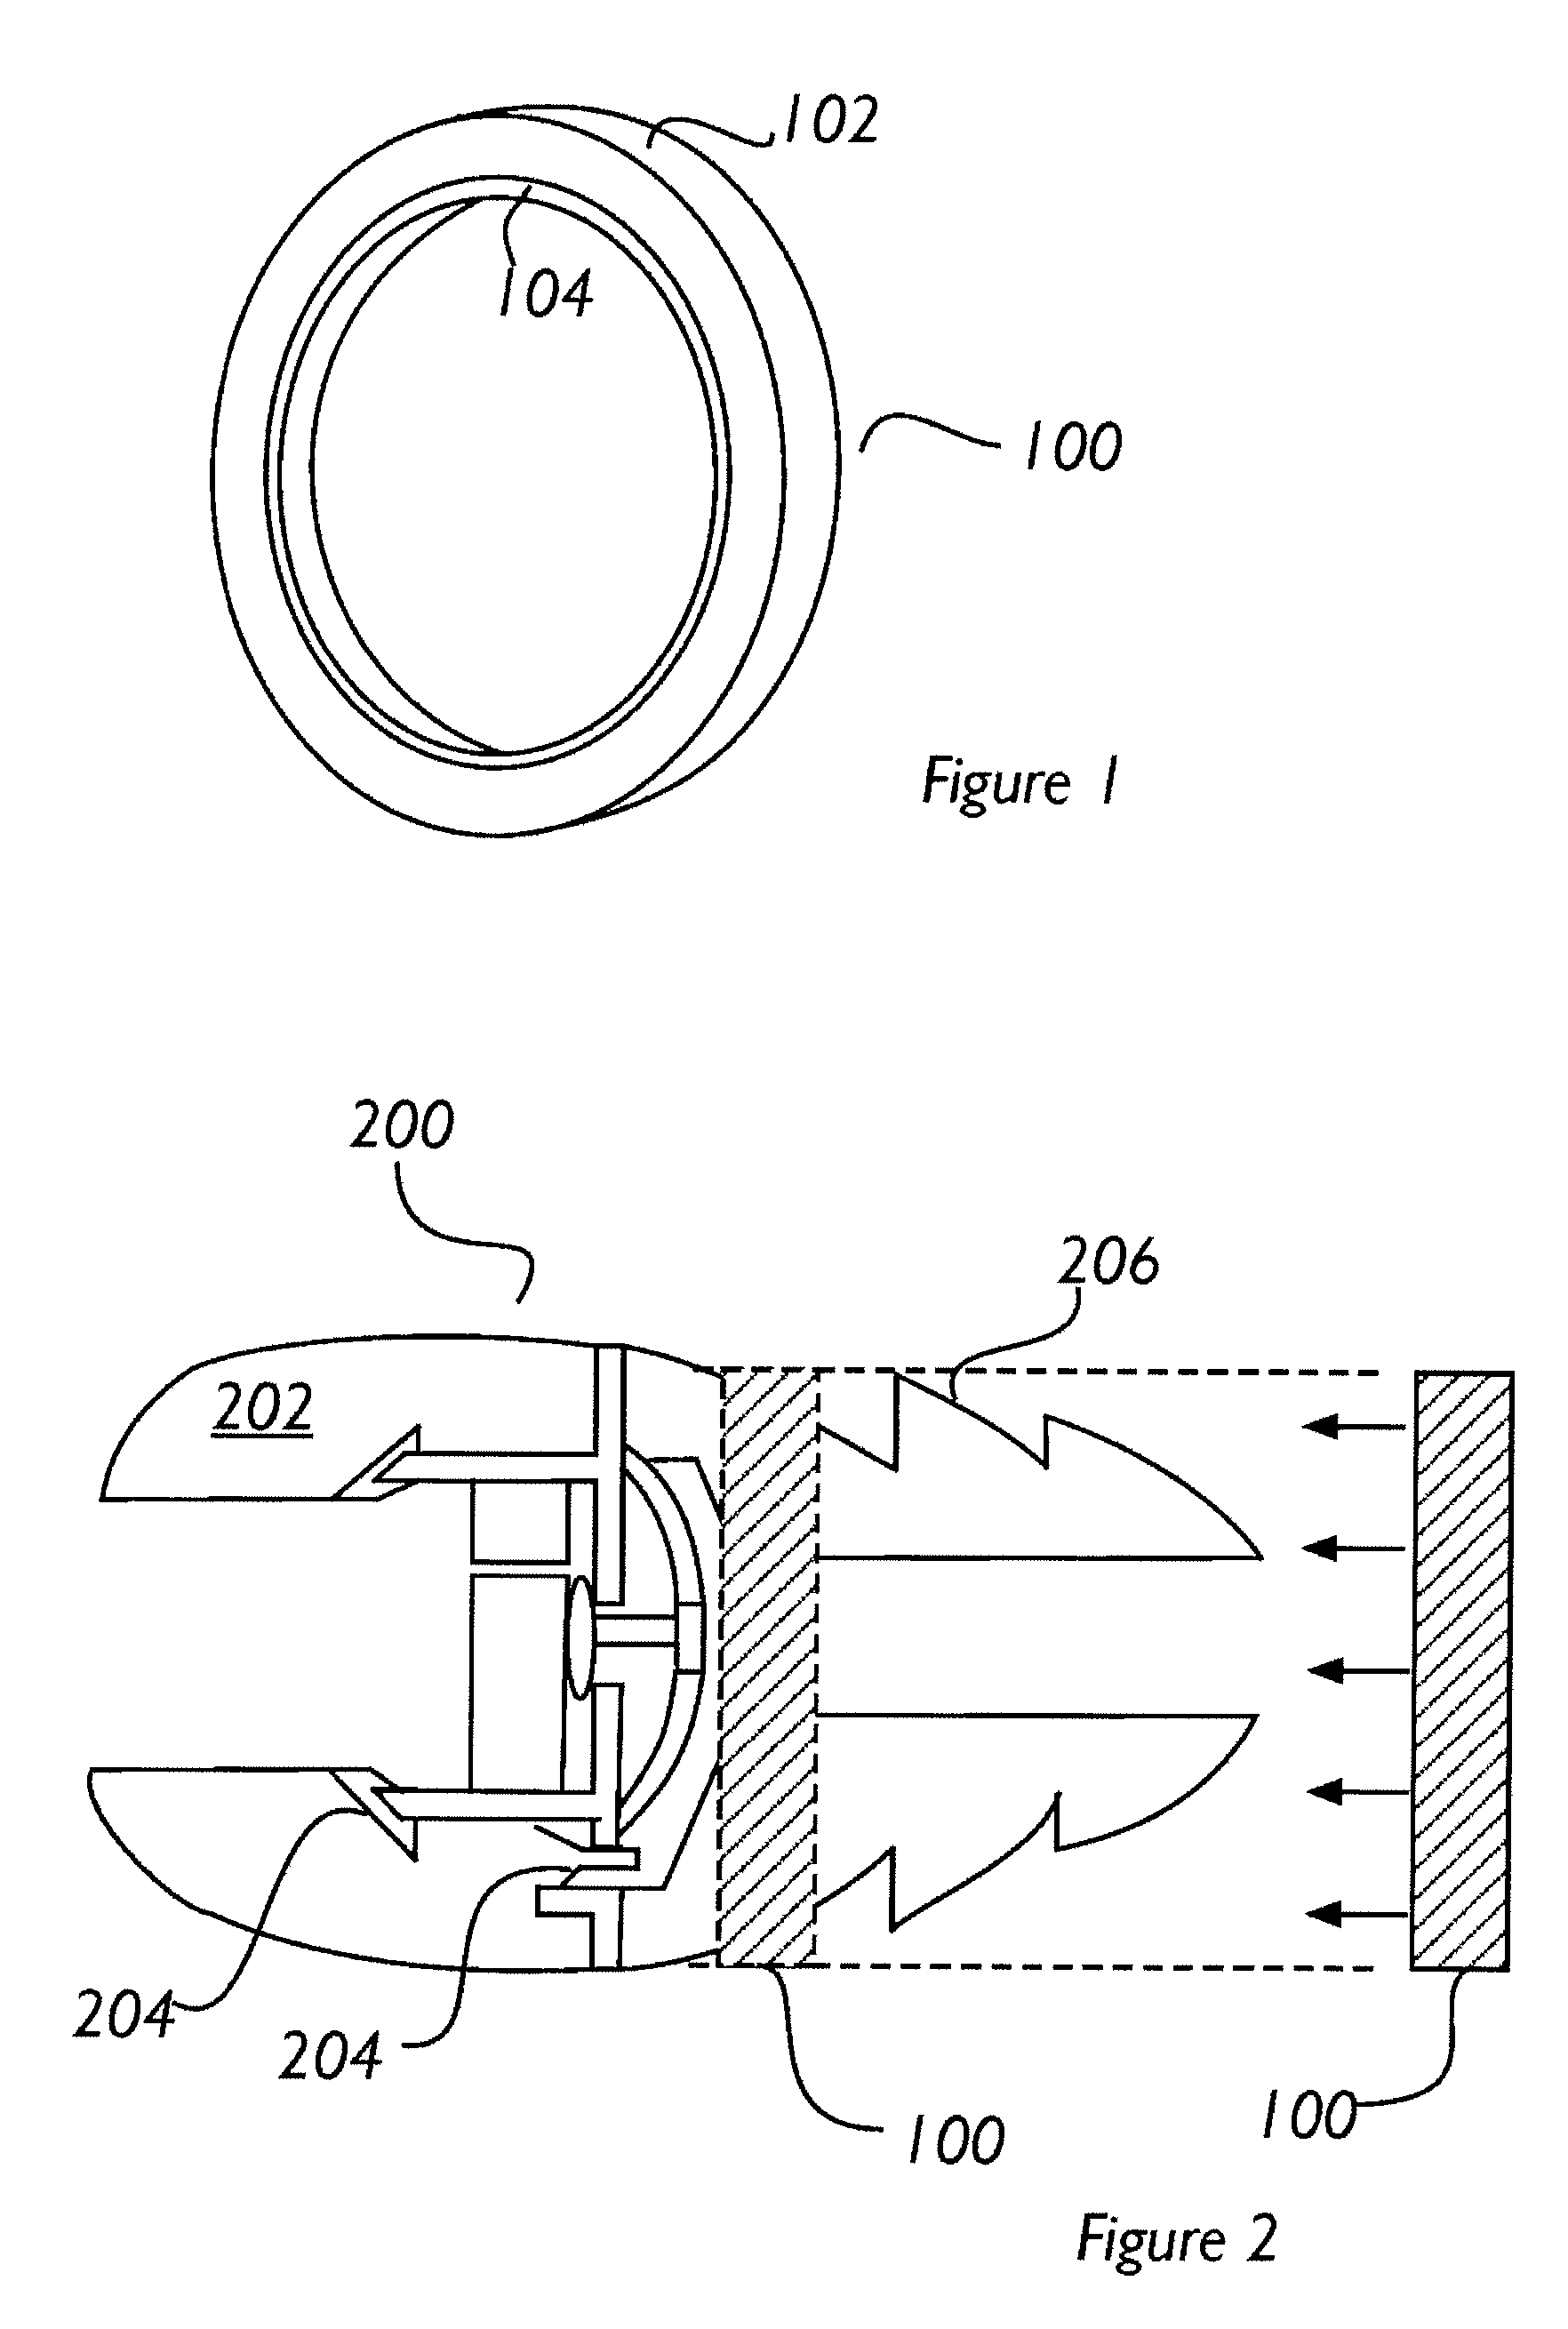 Ring transducers for sonic, ultrasonic hearing